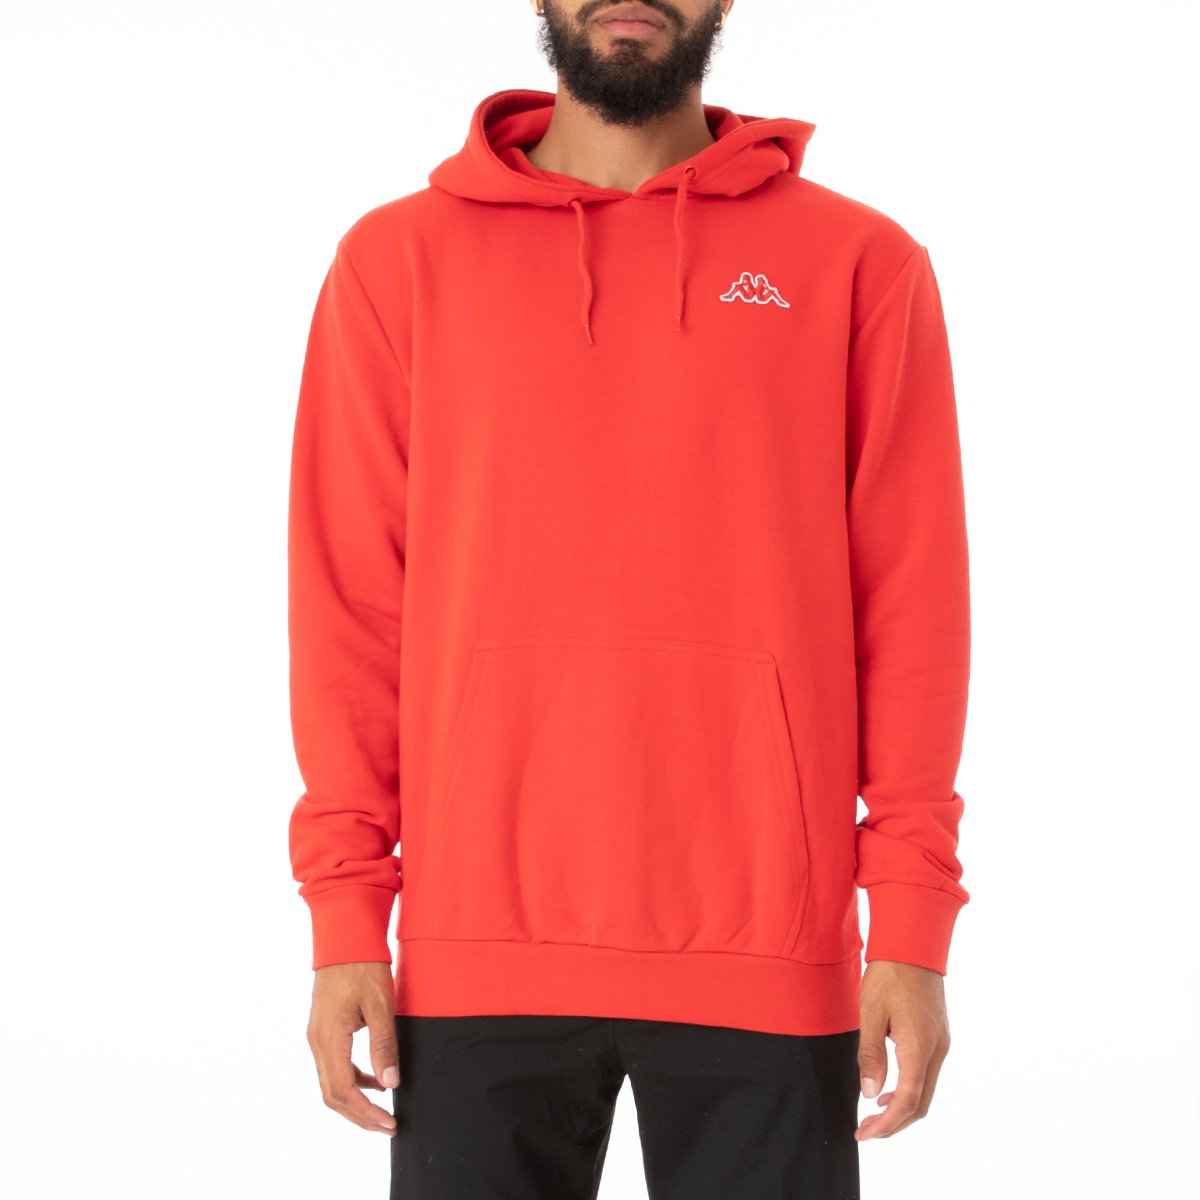 KAPPA LOGO CAIOK SWEATER-Red MD Coral